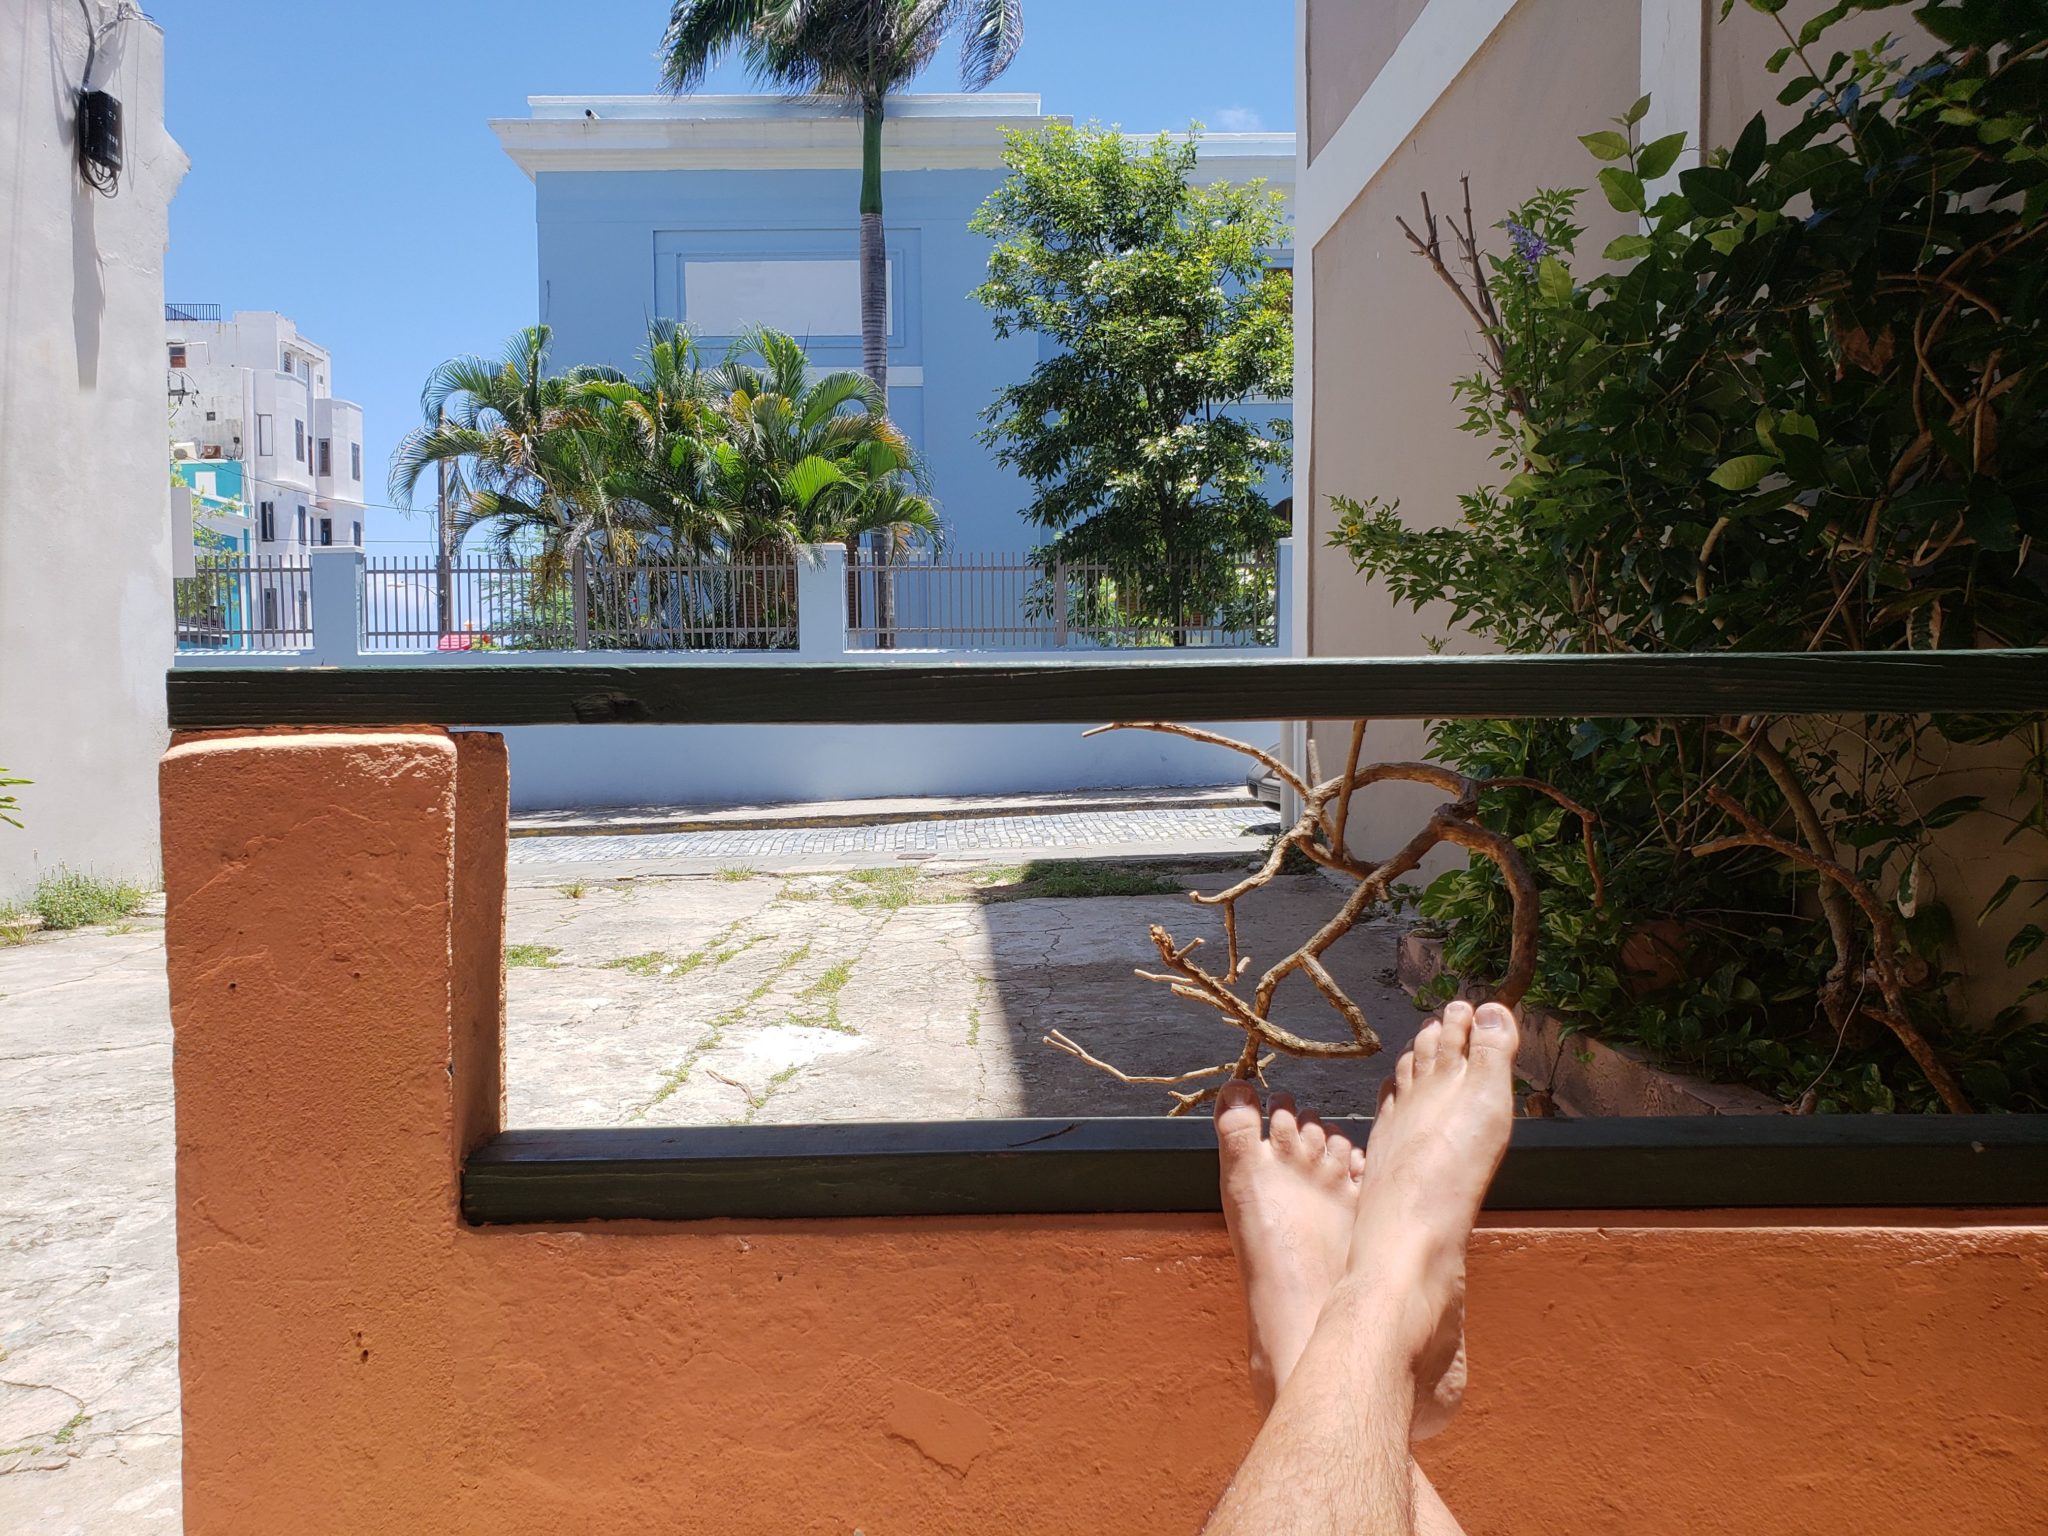 a person's feet on a balcony